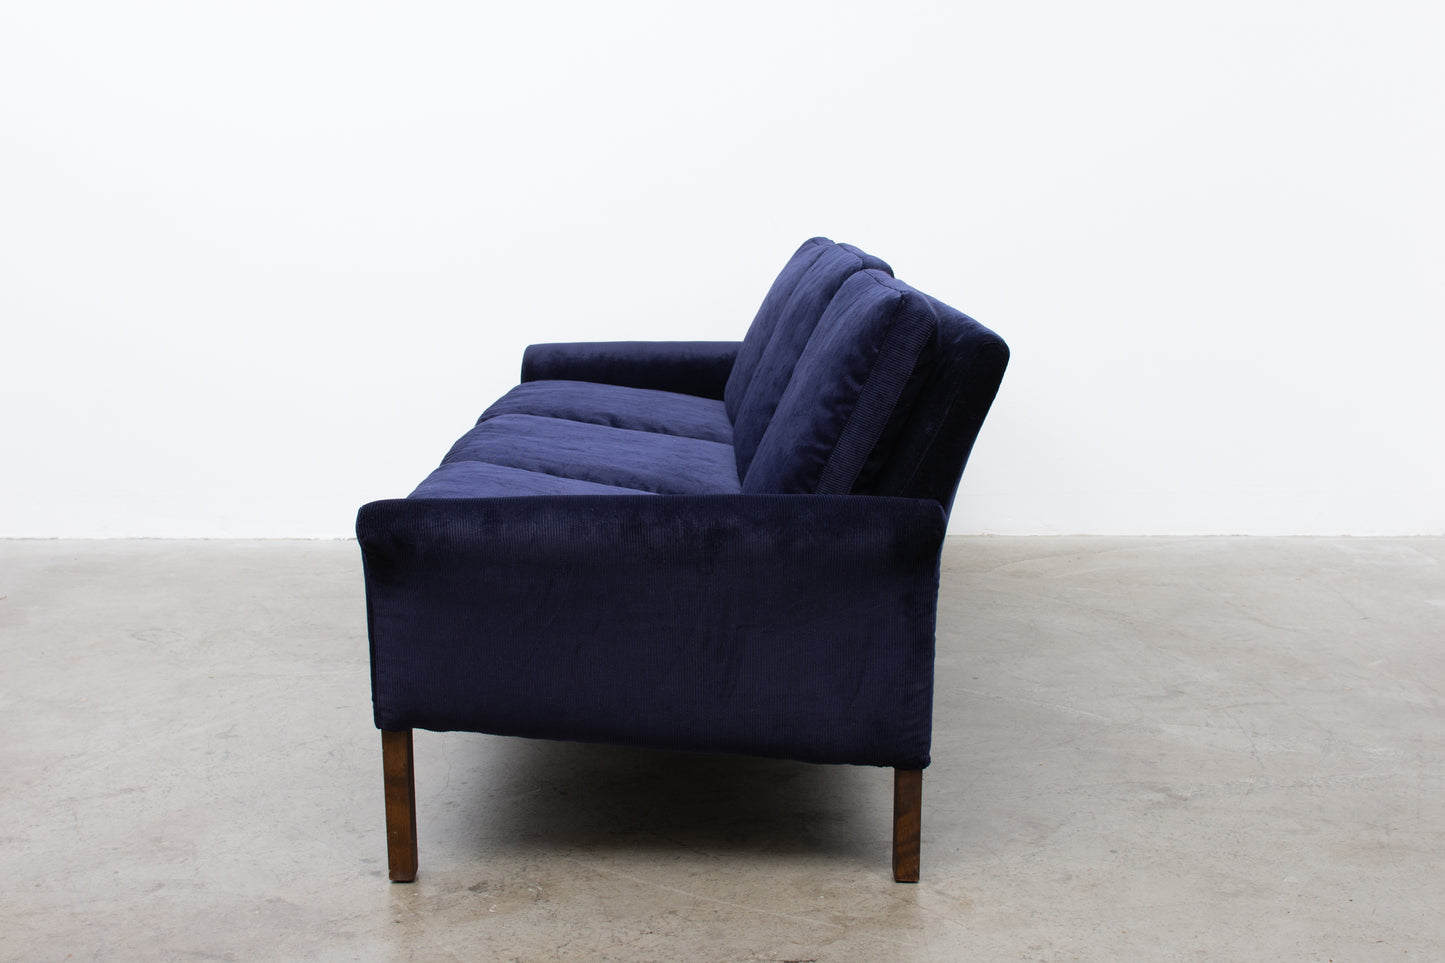 Newly upholstered: 1960s three seater in navy corduroy